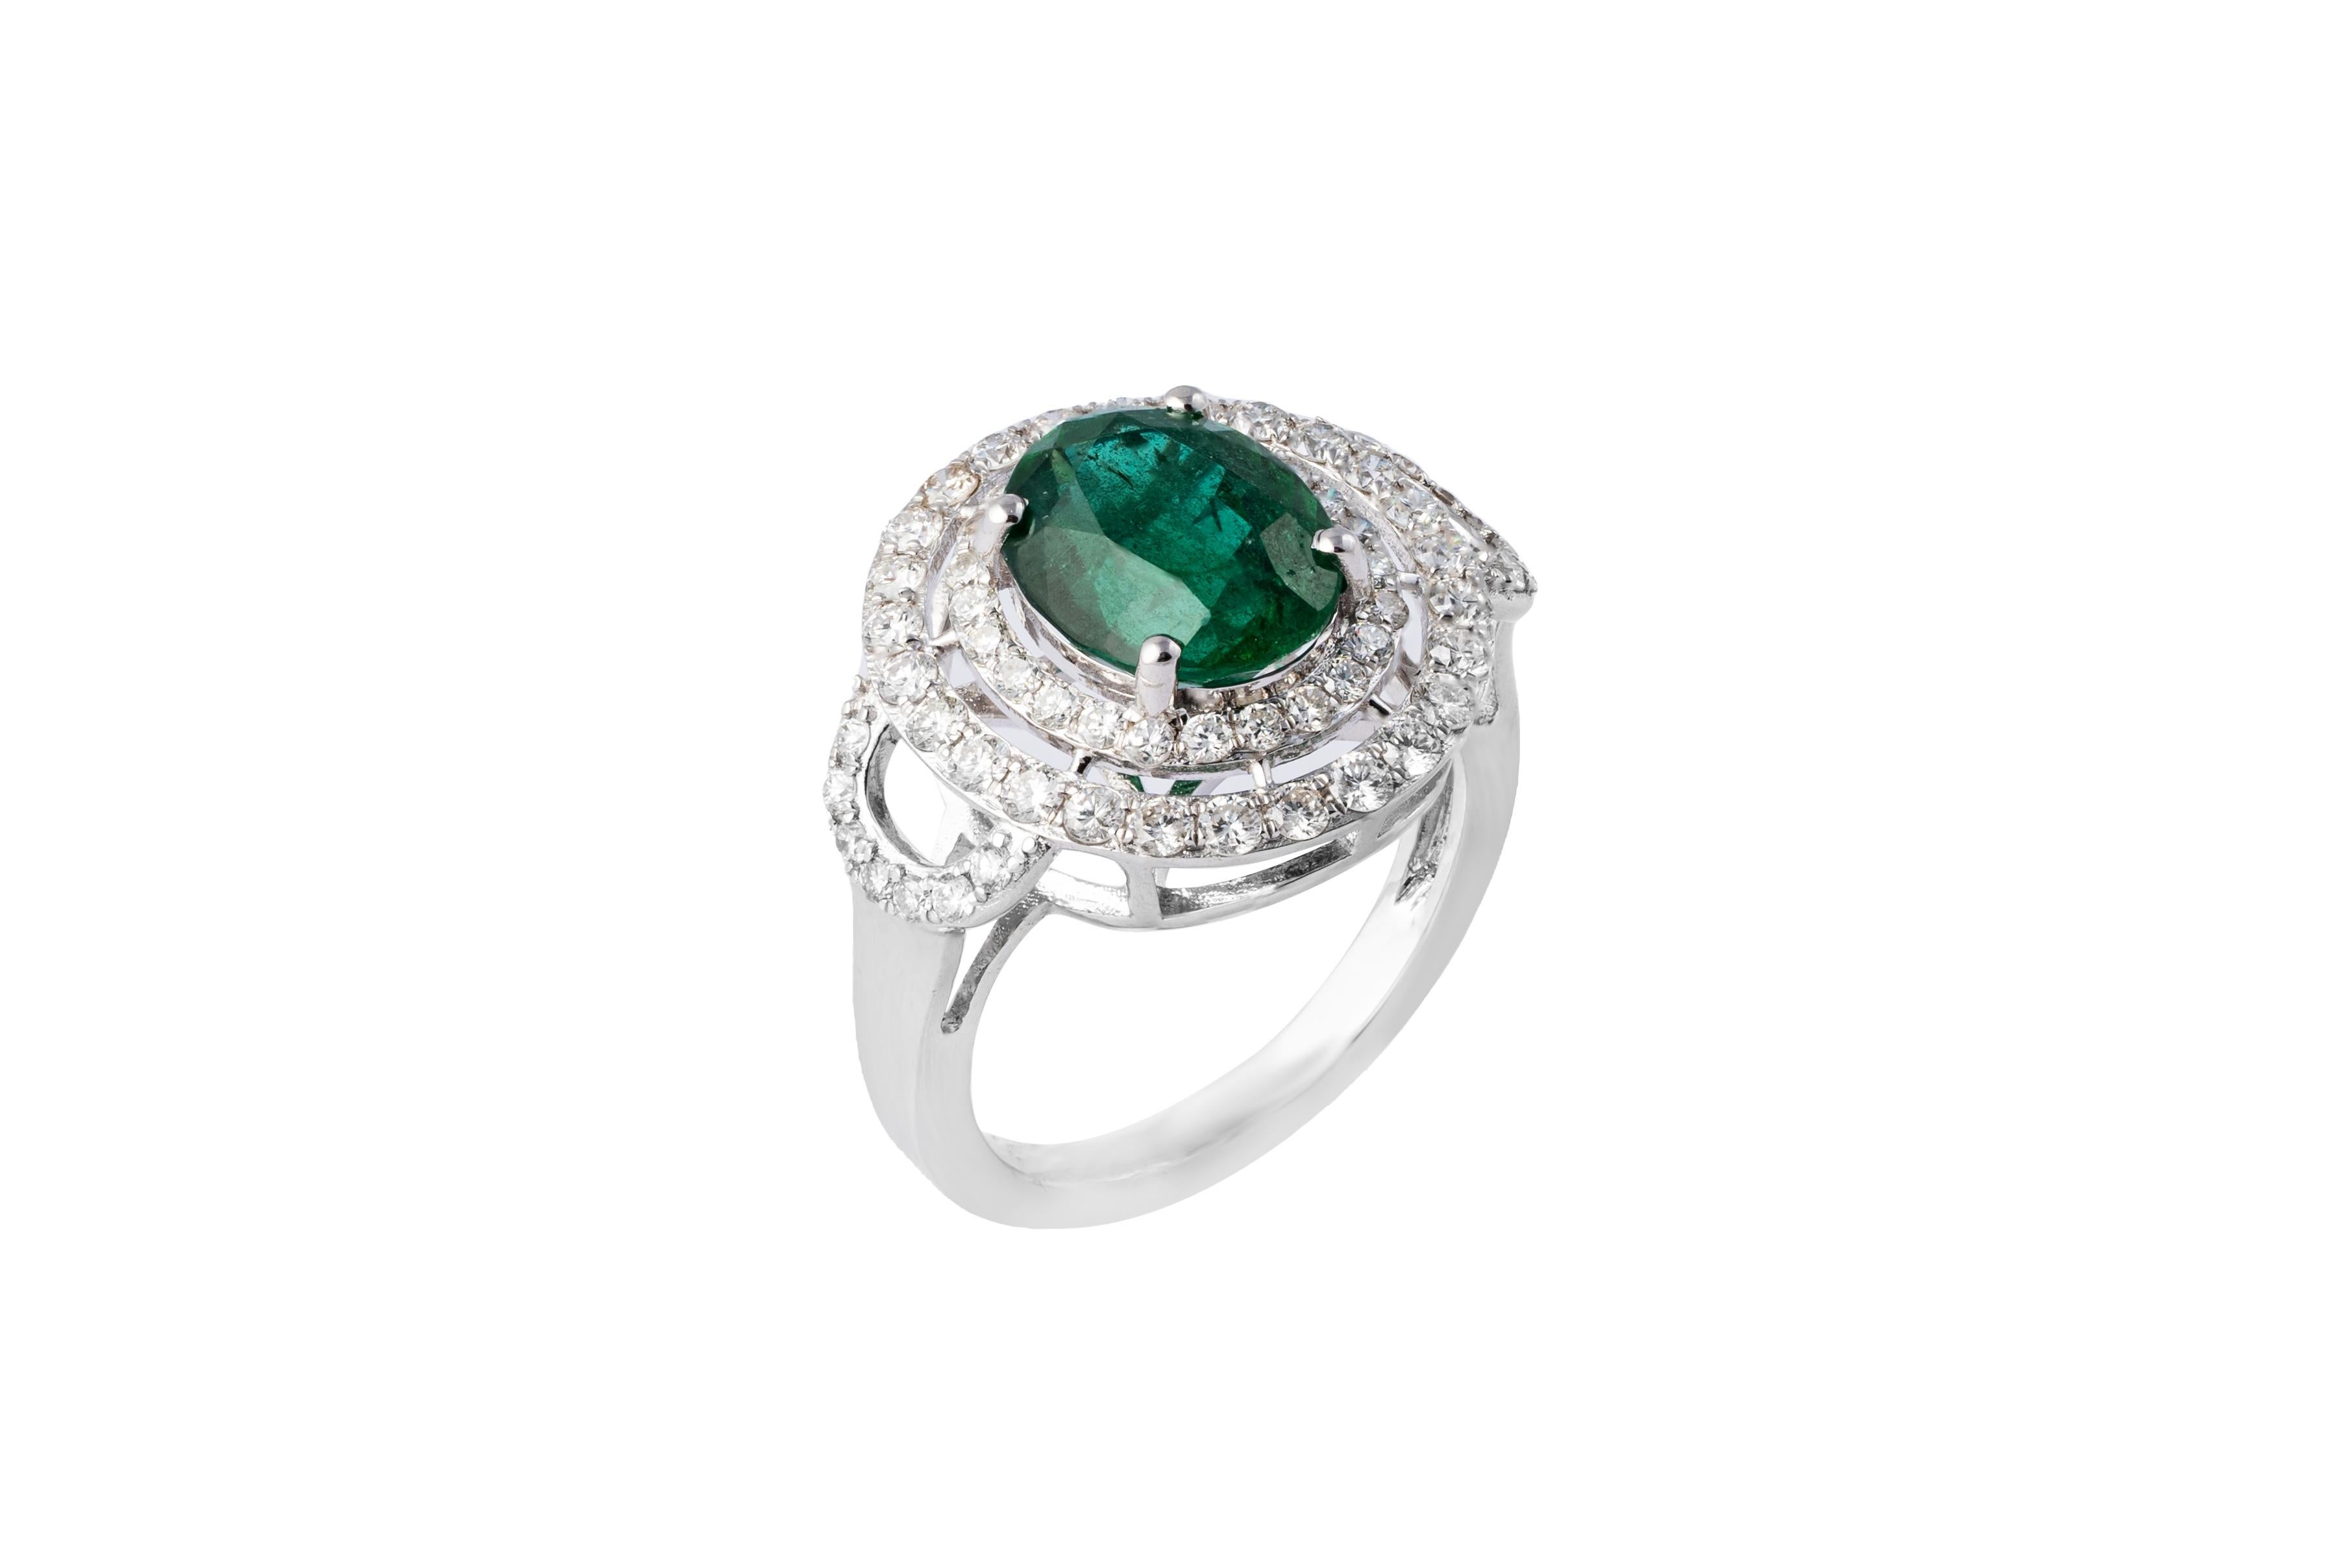 this is an awesome natural Zambian Emerald ring.Emeralds are very high quality and diamonds are very good with vsi clarity and G colour.
emeralds: 3.36cts
diamonds: 1.01cts
gold: 4.65gms
very hard to capture the true color and luster of the stone, I